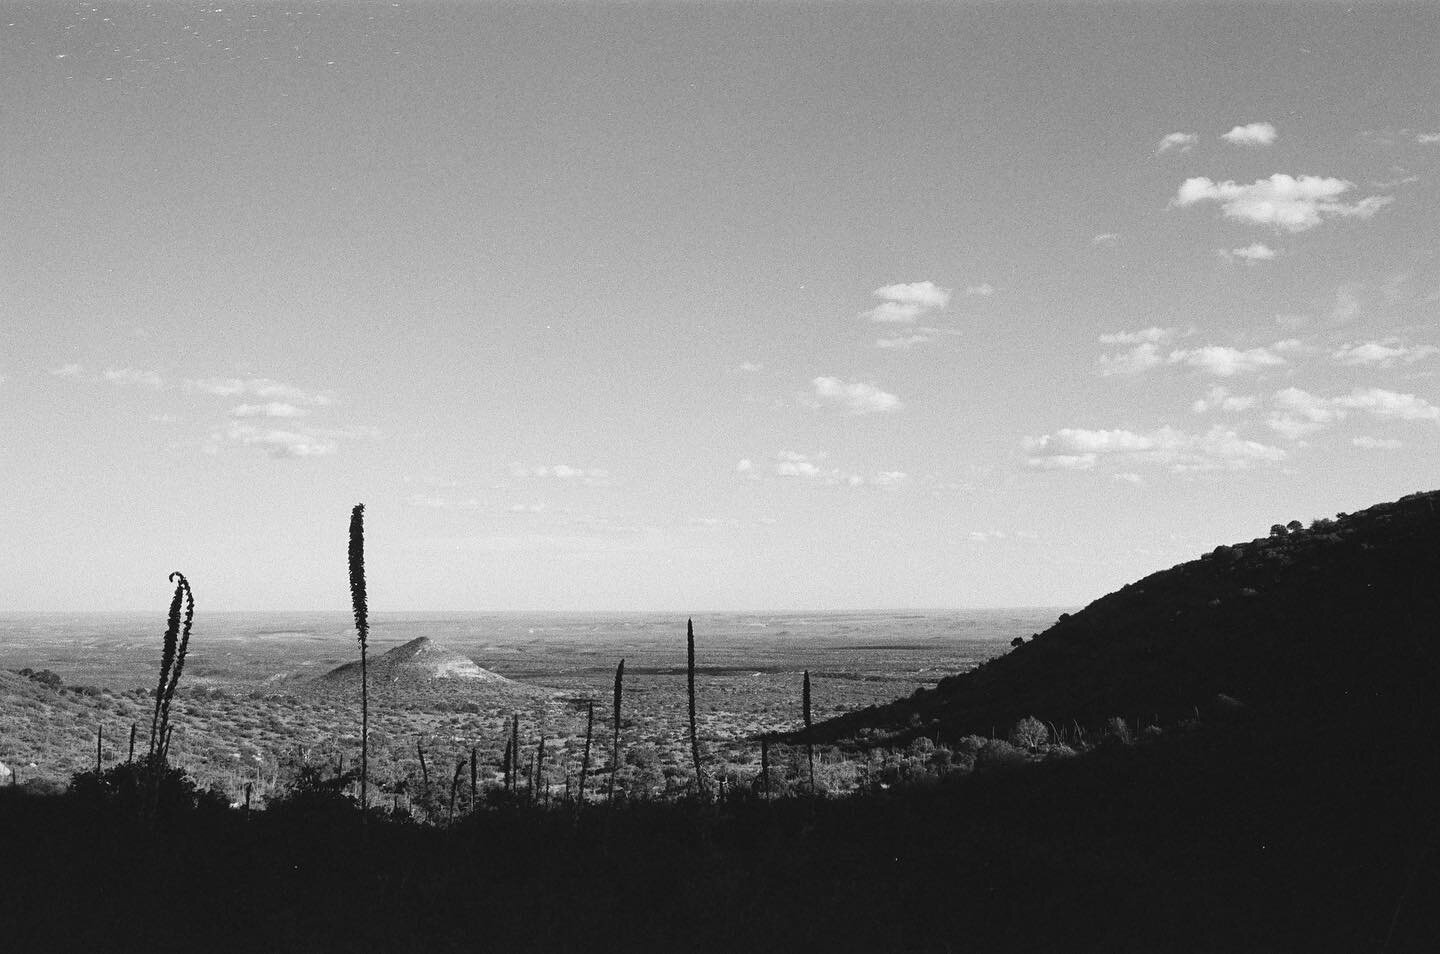 September road trip to the Guadalupe Mountains, the Lightning Field (no art just field), Albuquerque Balloon Fiesta, and bonus Marfa from our trip to the Agave Fest in June. 
.
.
#35mm
#kodaktrix